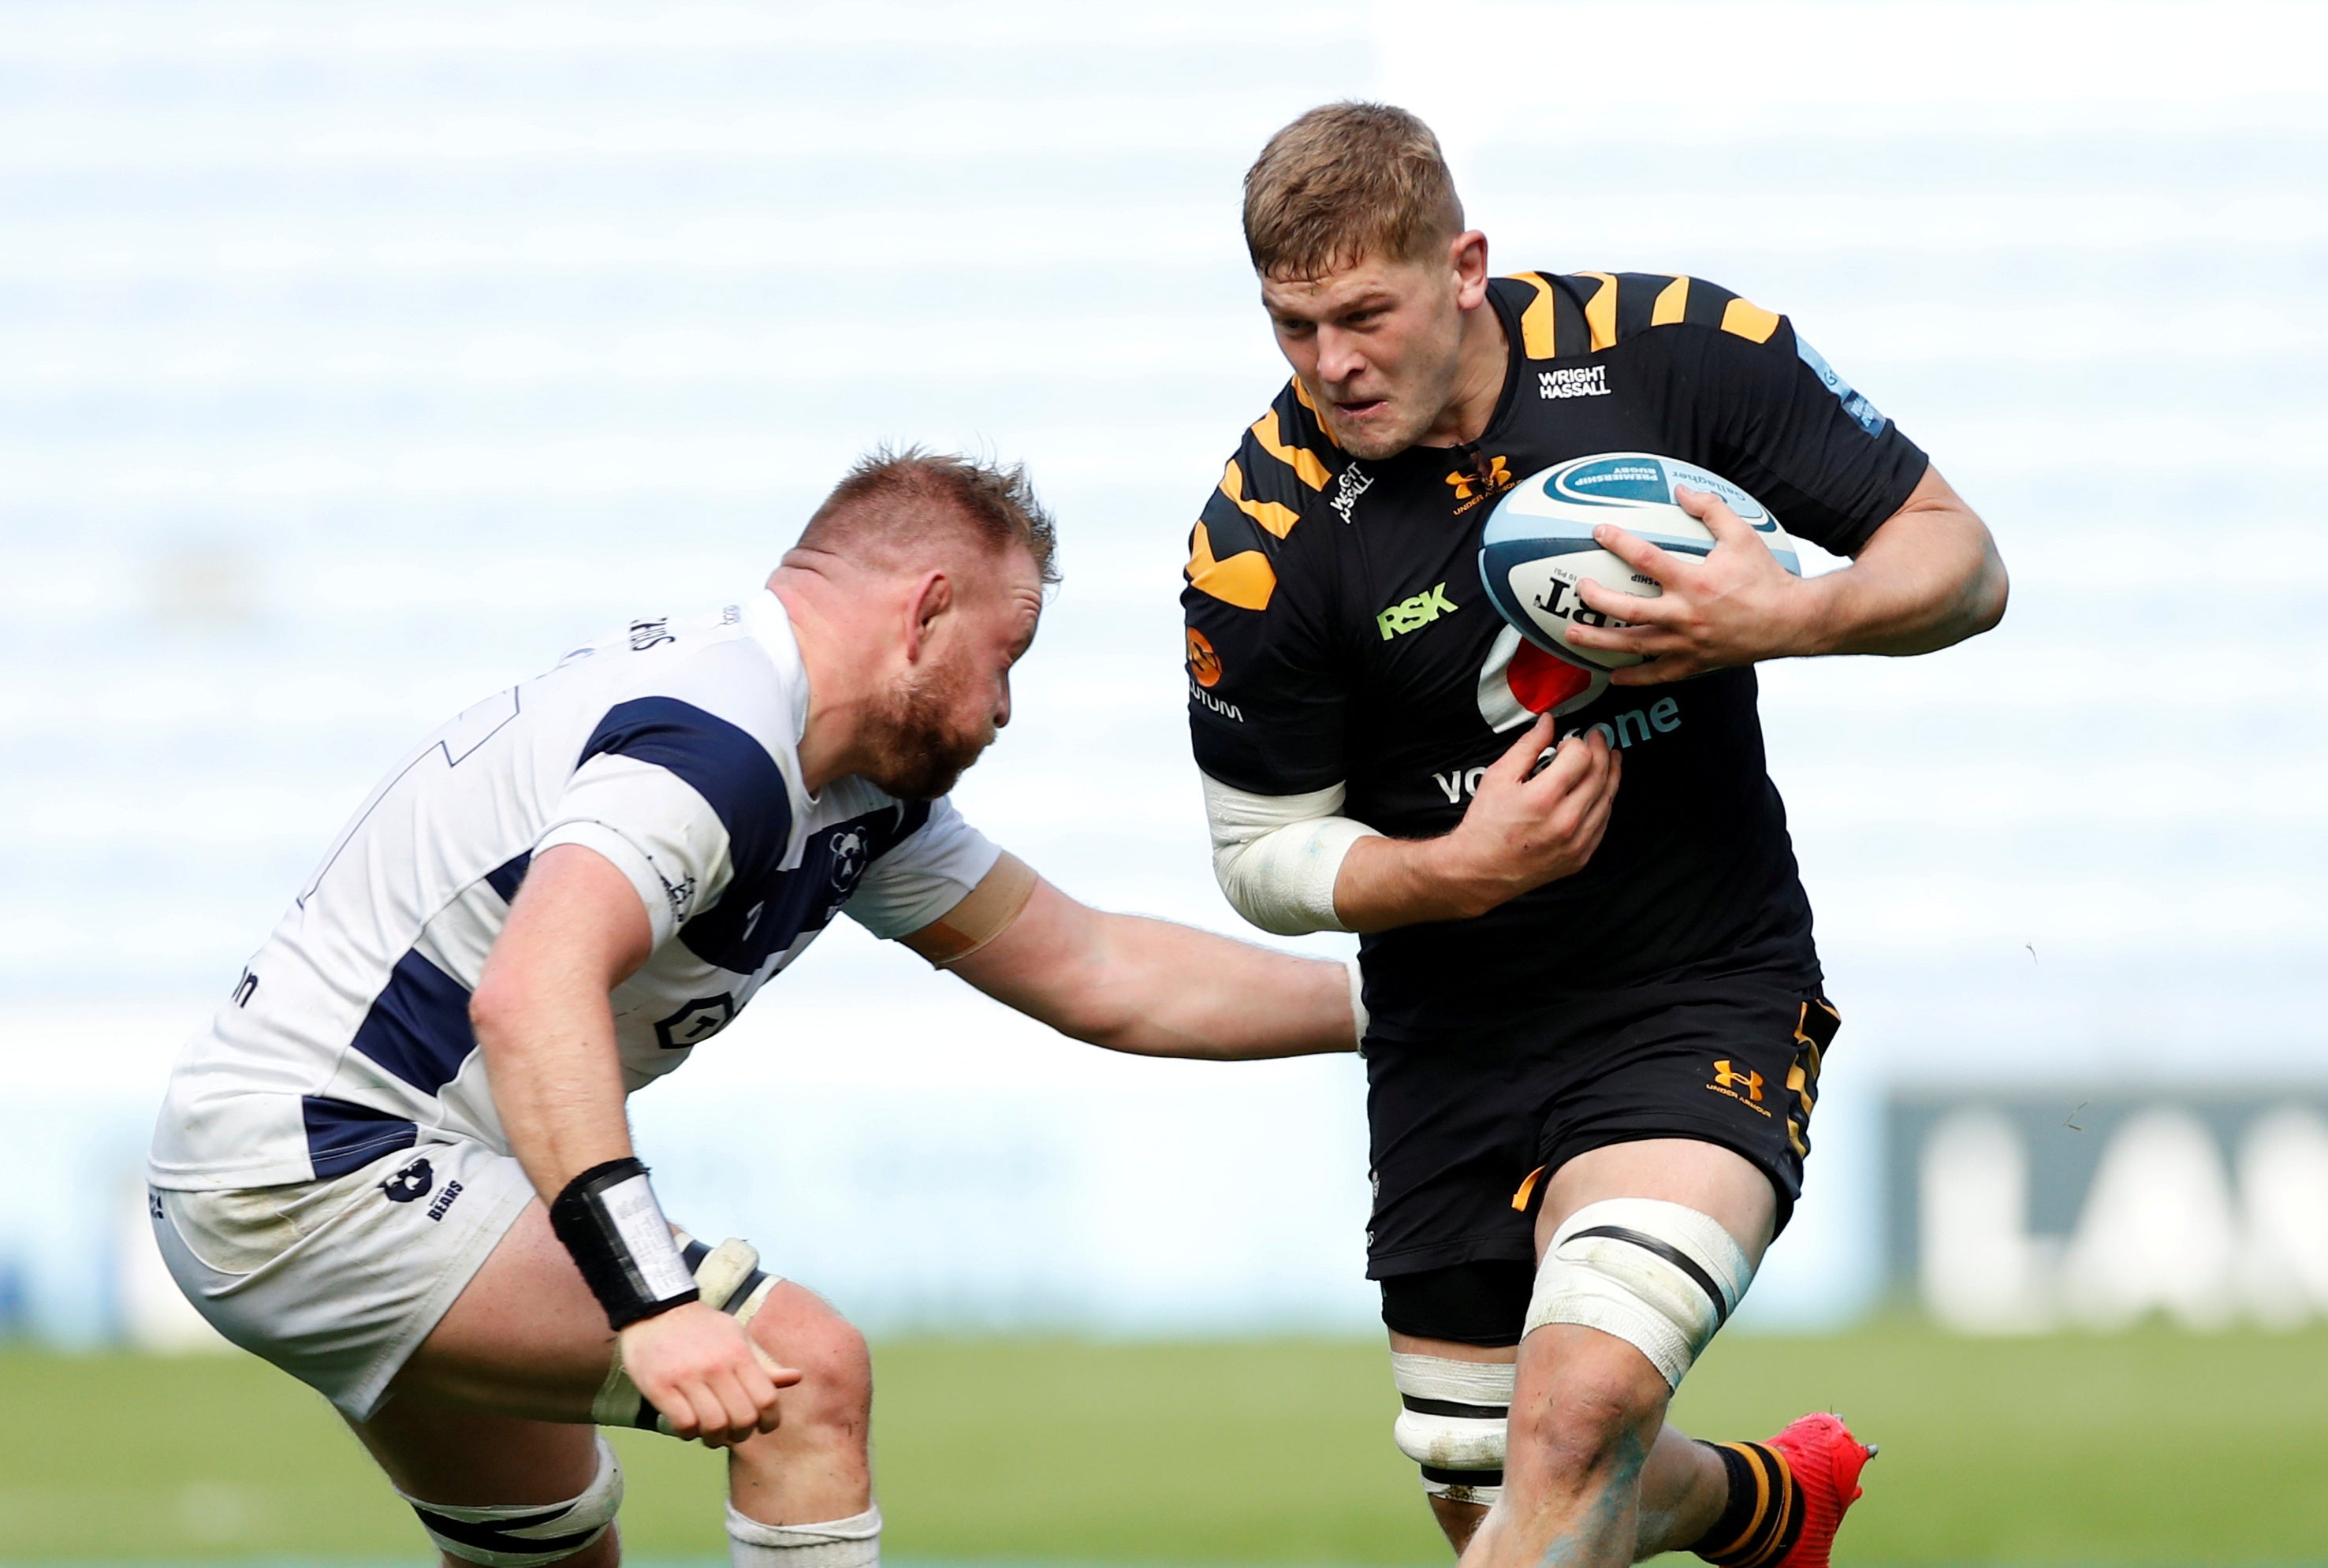 Jack Willis steps up to England duty after starring for Wasps in the Premiership